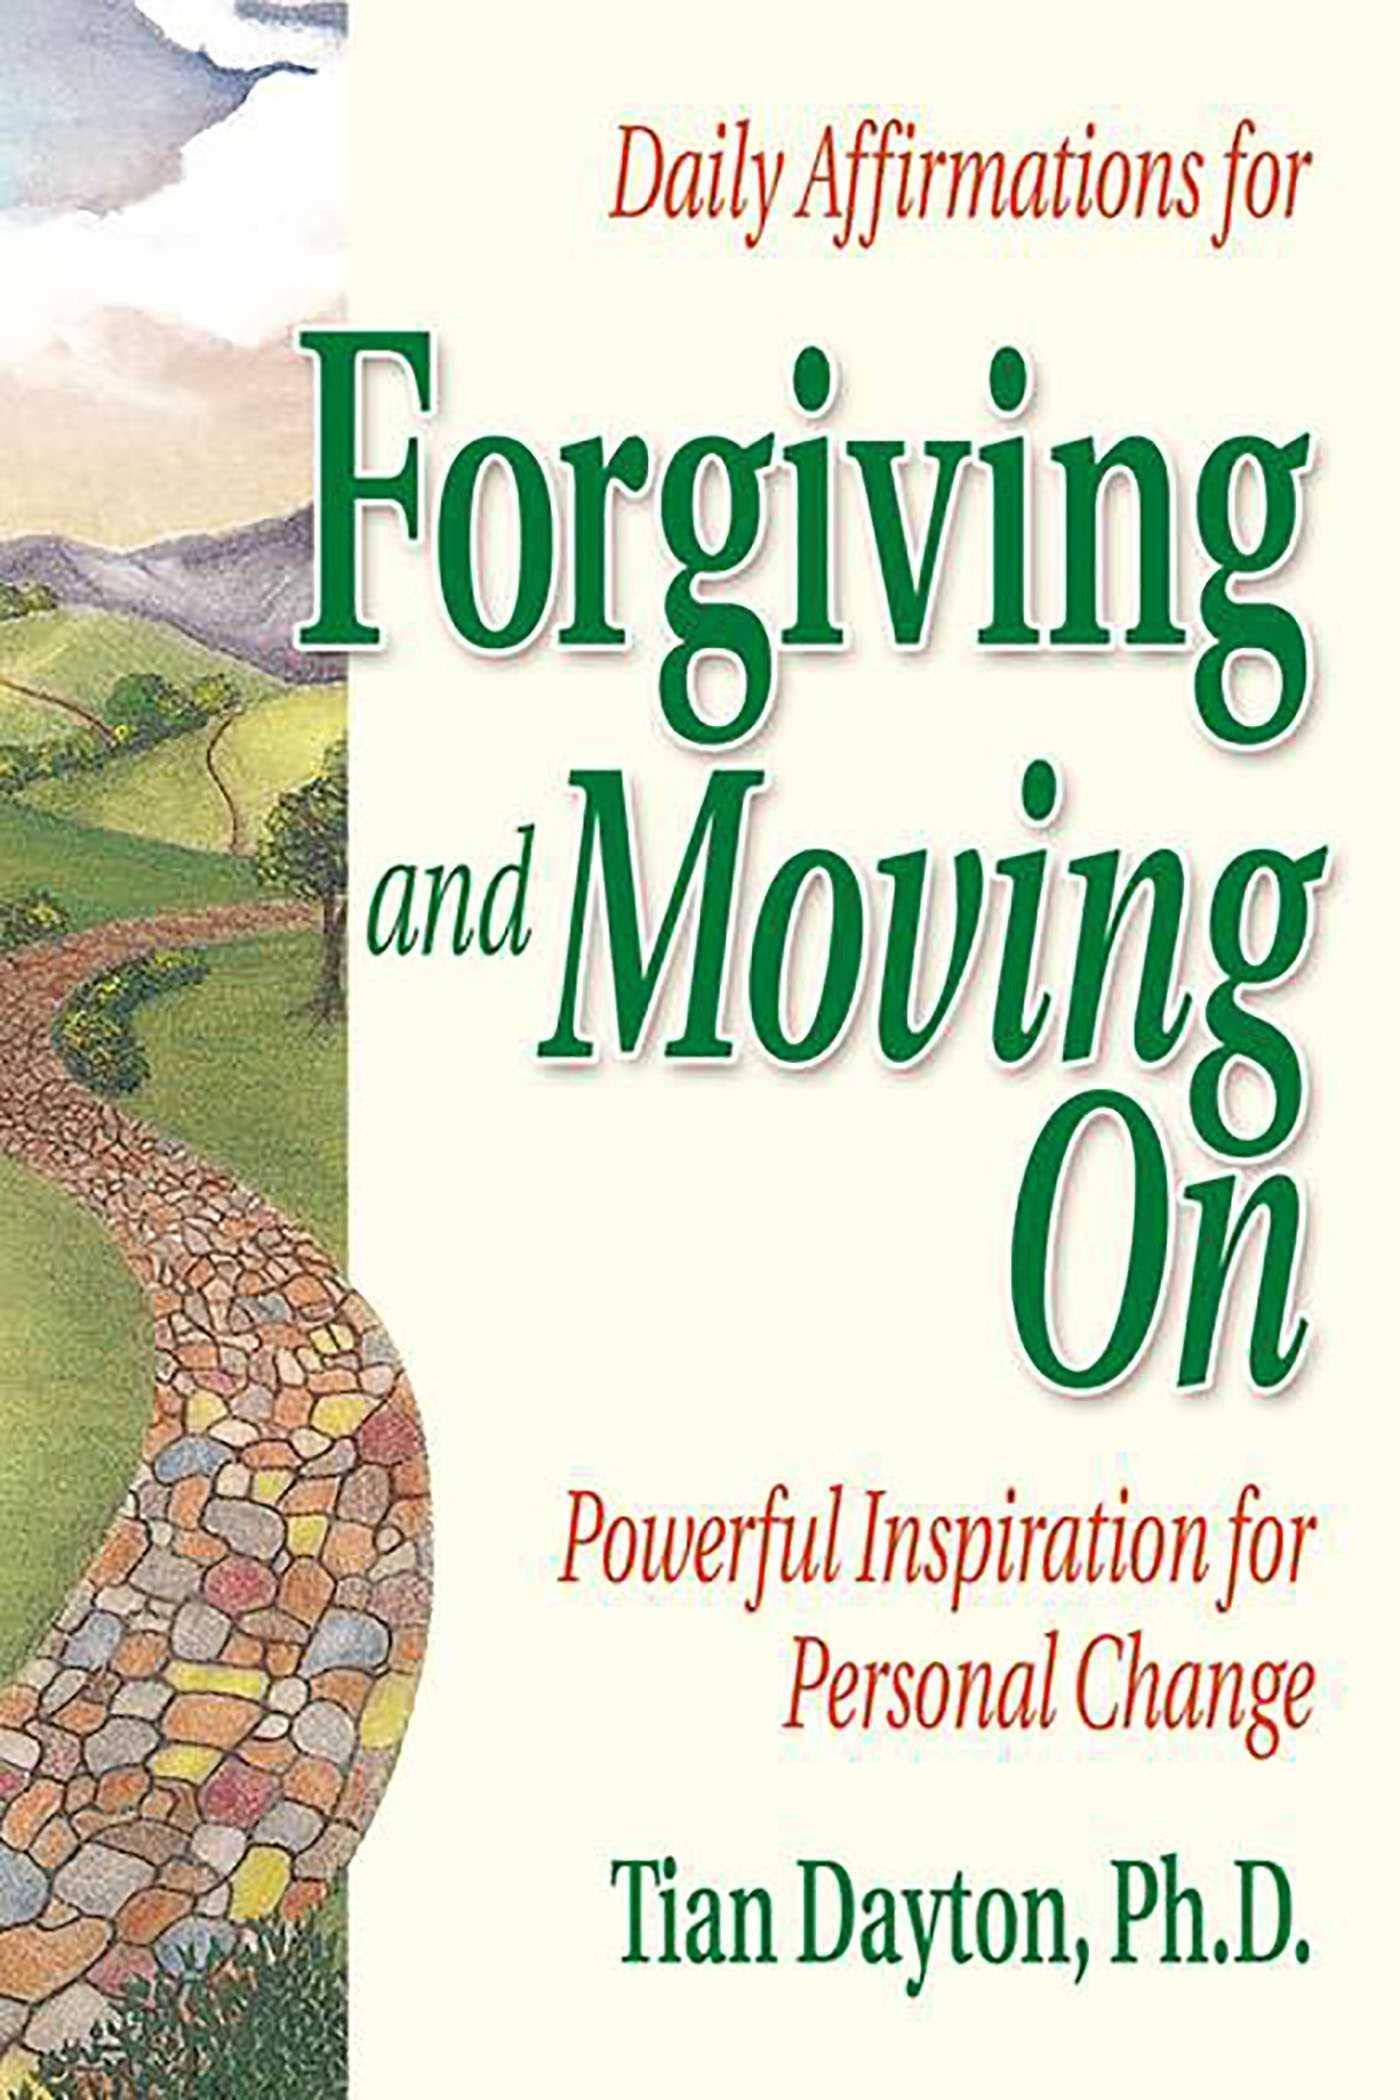 Daily Affirmations for Forgiving and Moving On - SureShot Books Publishing LLC